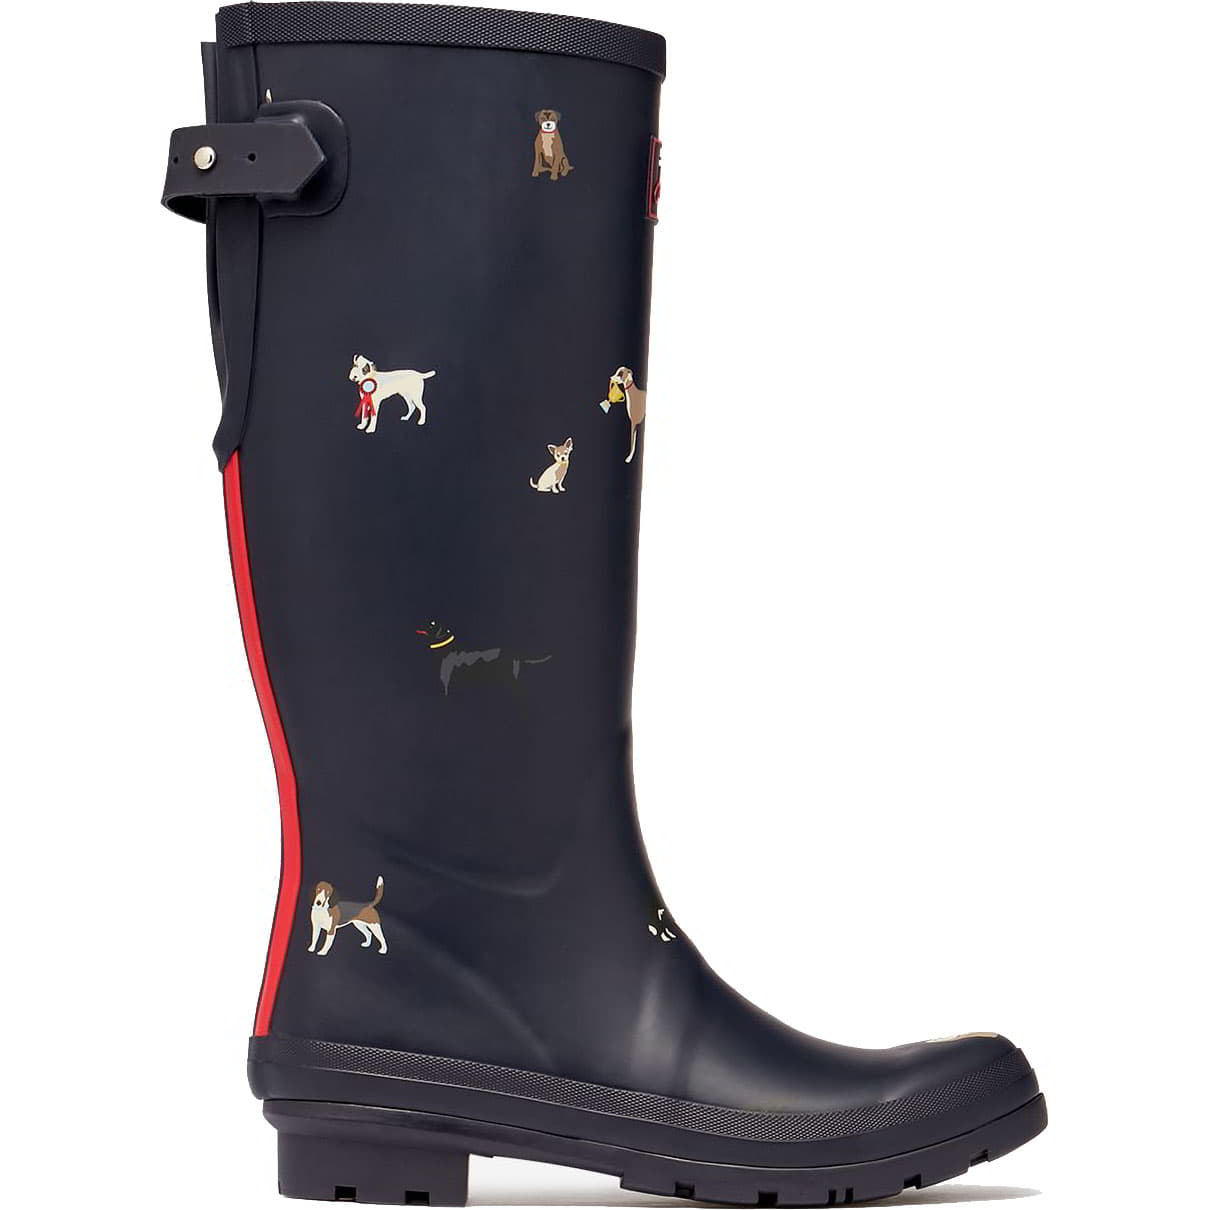 Joules Womens Welly Print Tall Wellington Boots Wellies - Navy Dogs - Uk 8